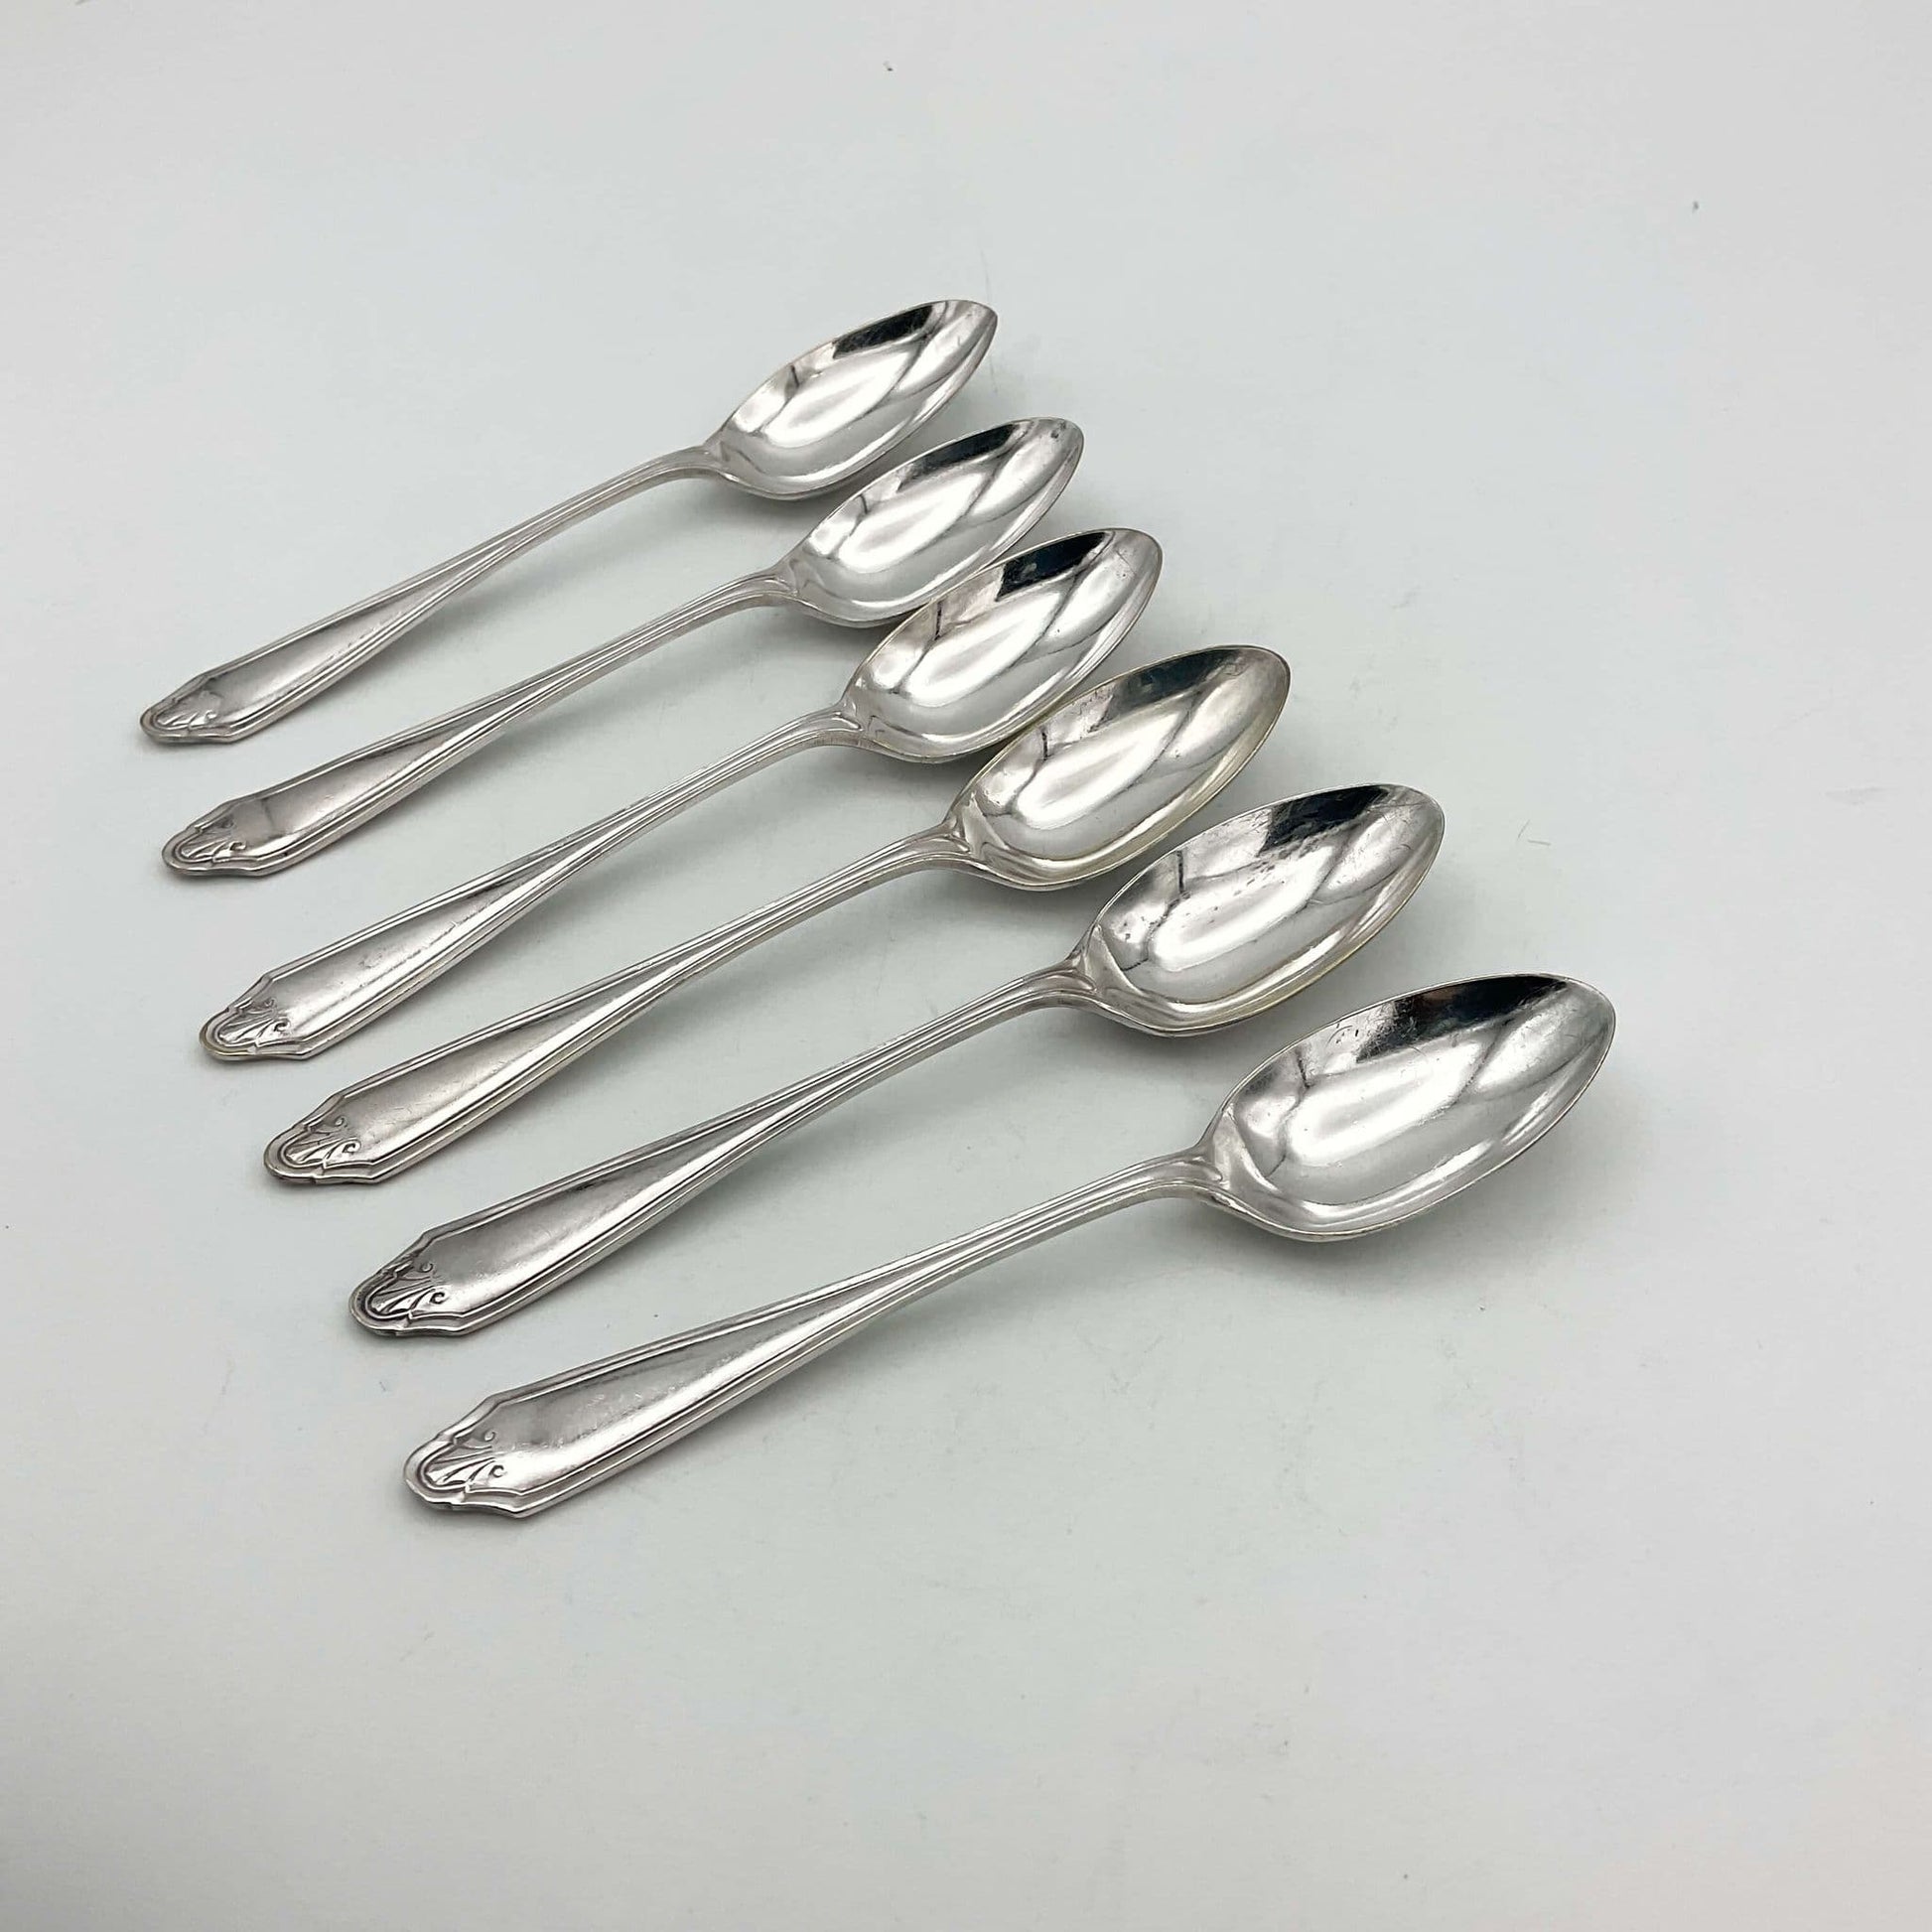 Six silver plated vintage coffee spoons on a plain background